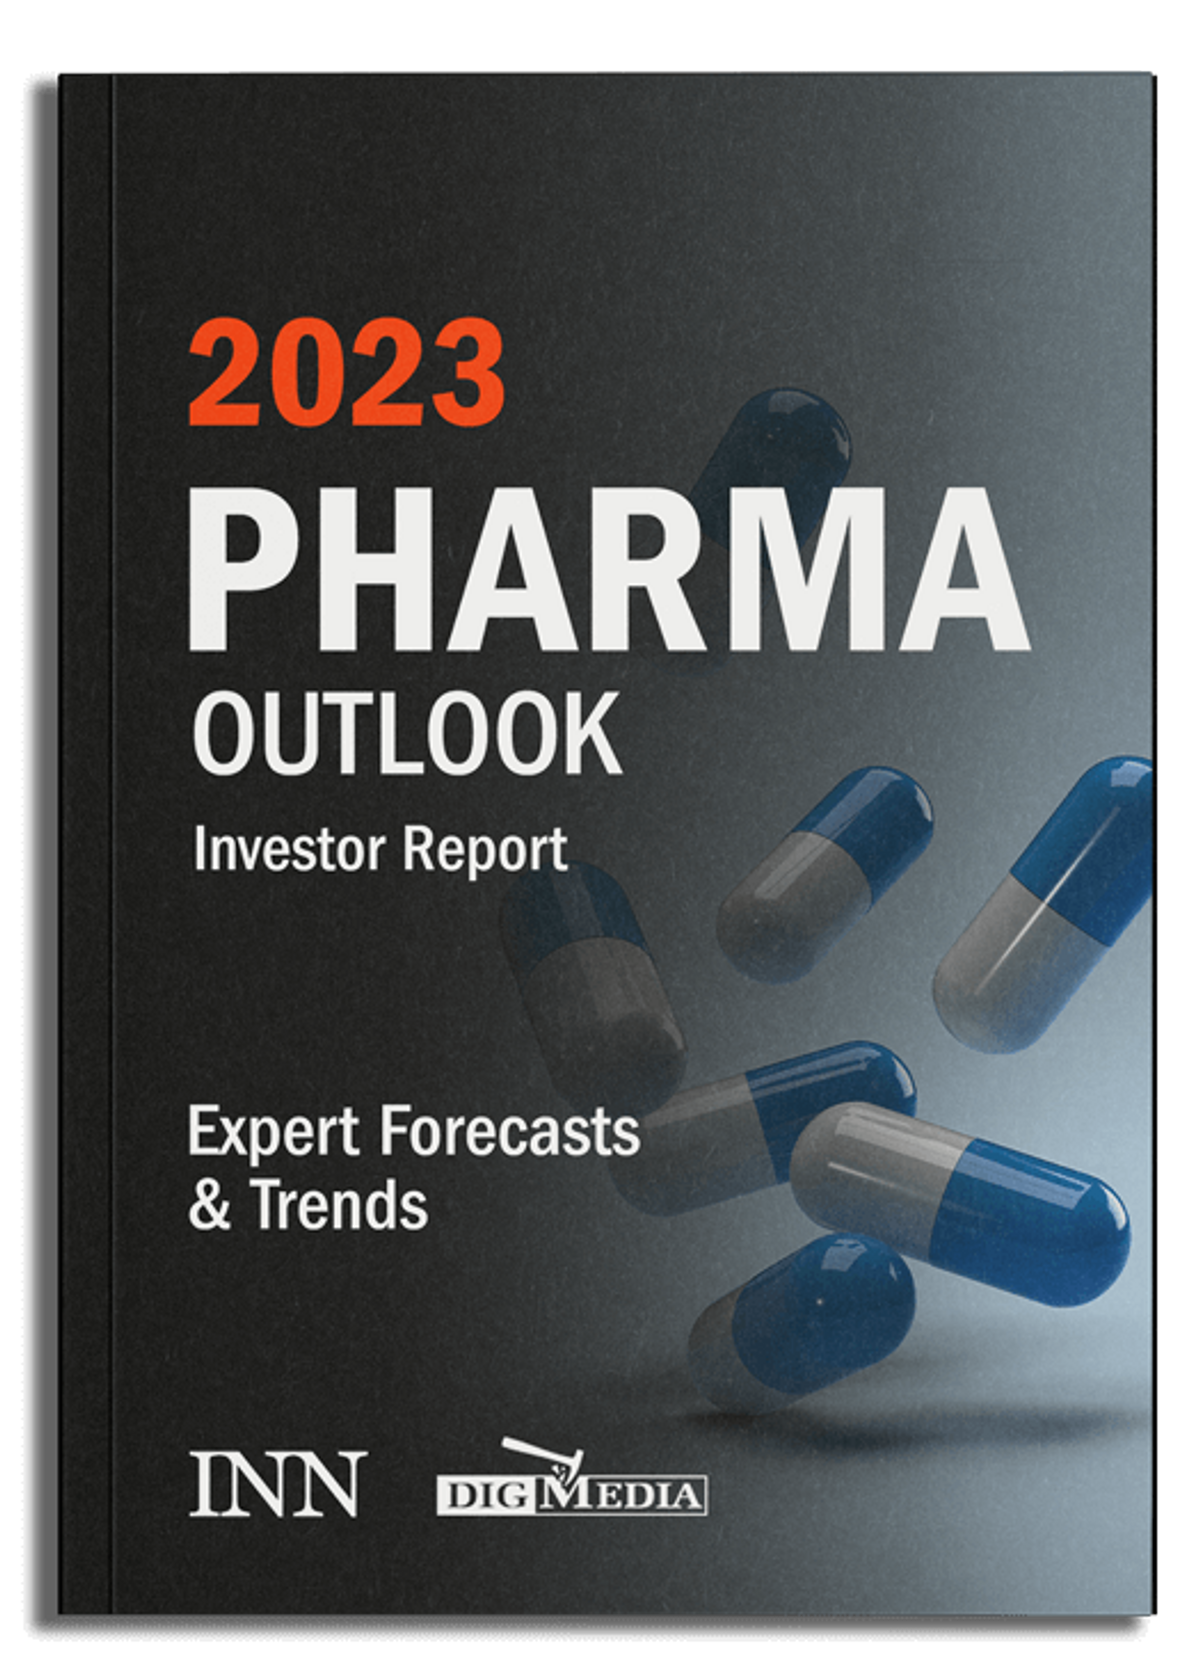 NEW! 2023 Pharmaceuticals Outlook Report.